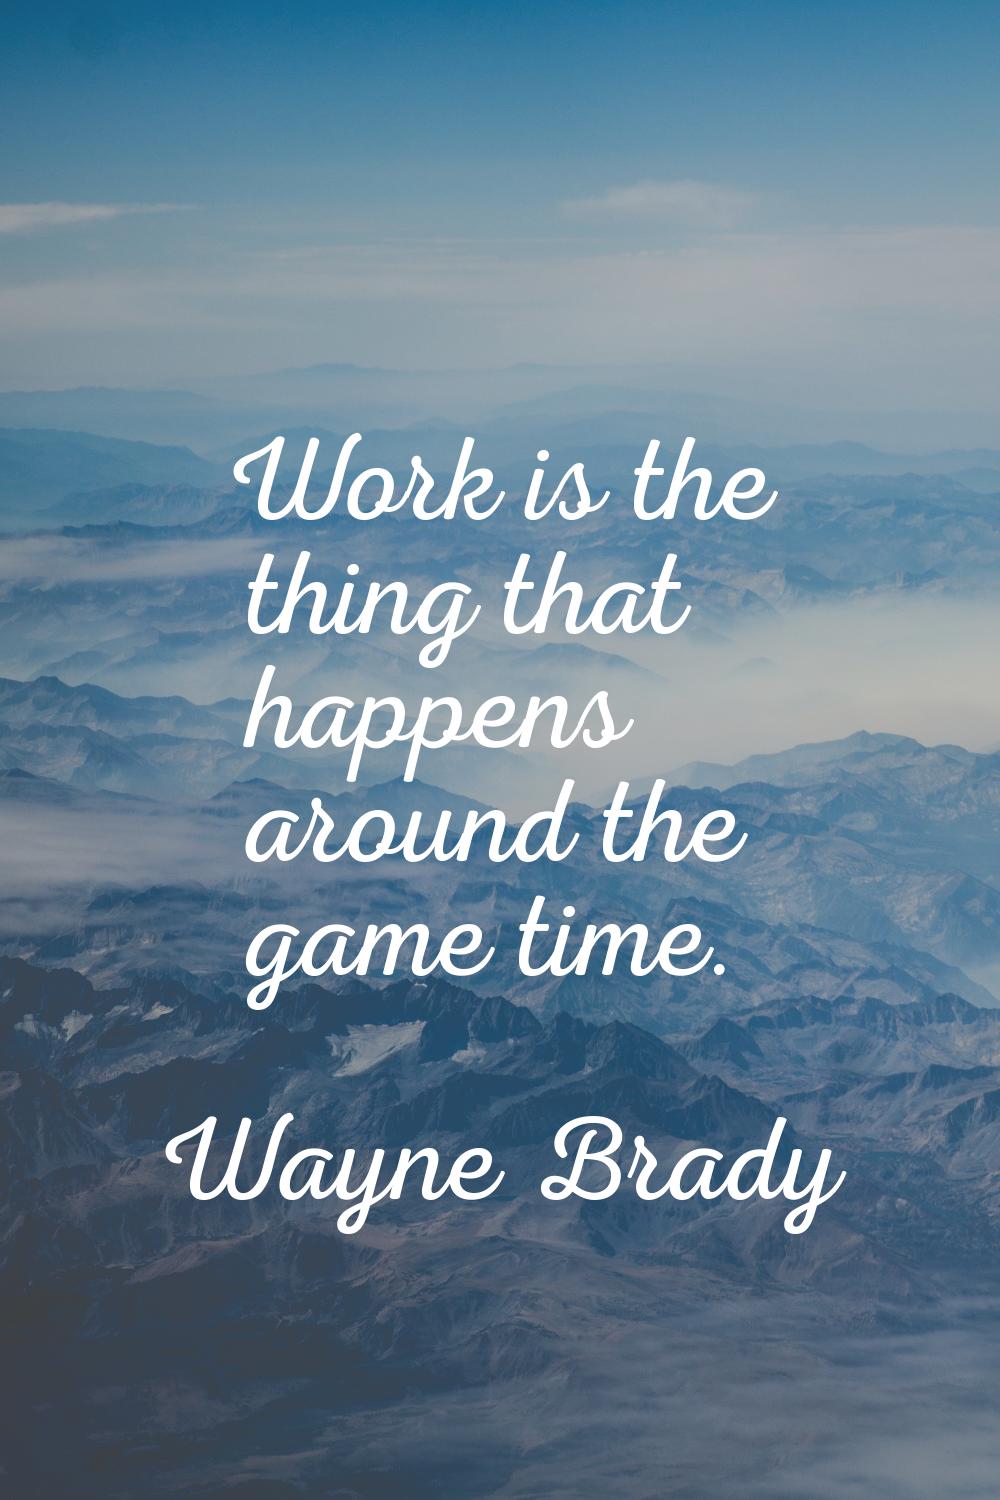 Work is the thing that happens around the game time.